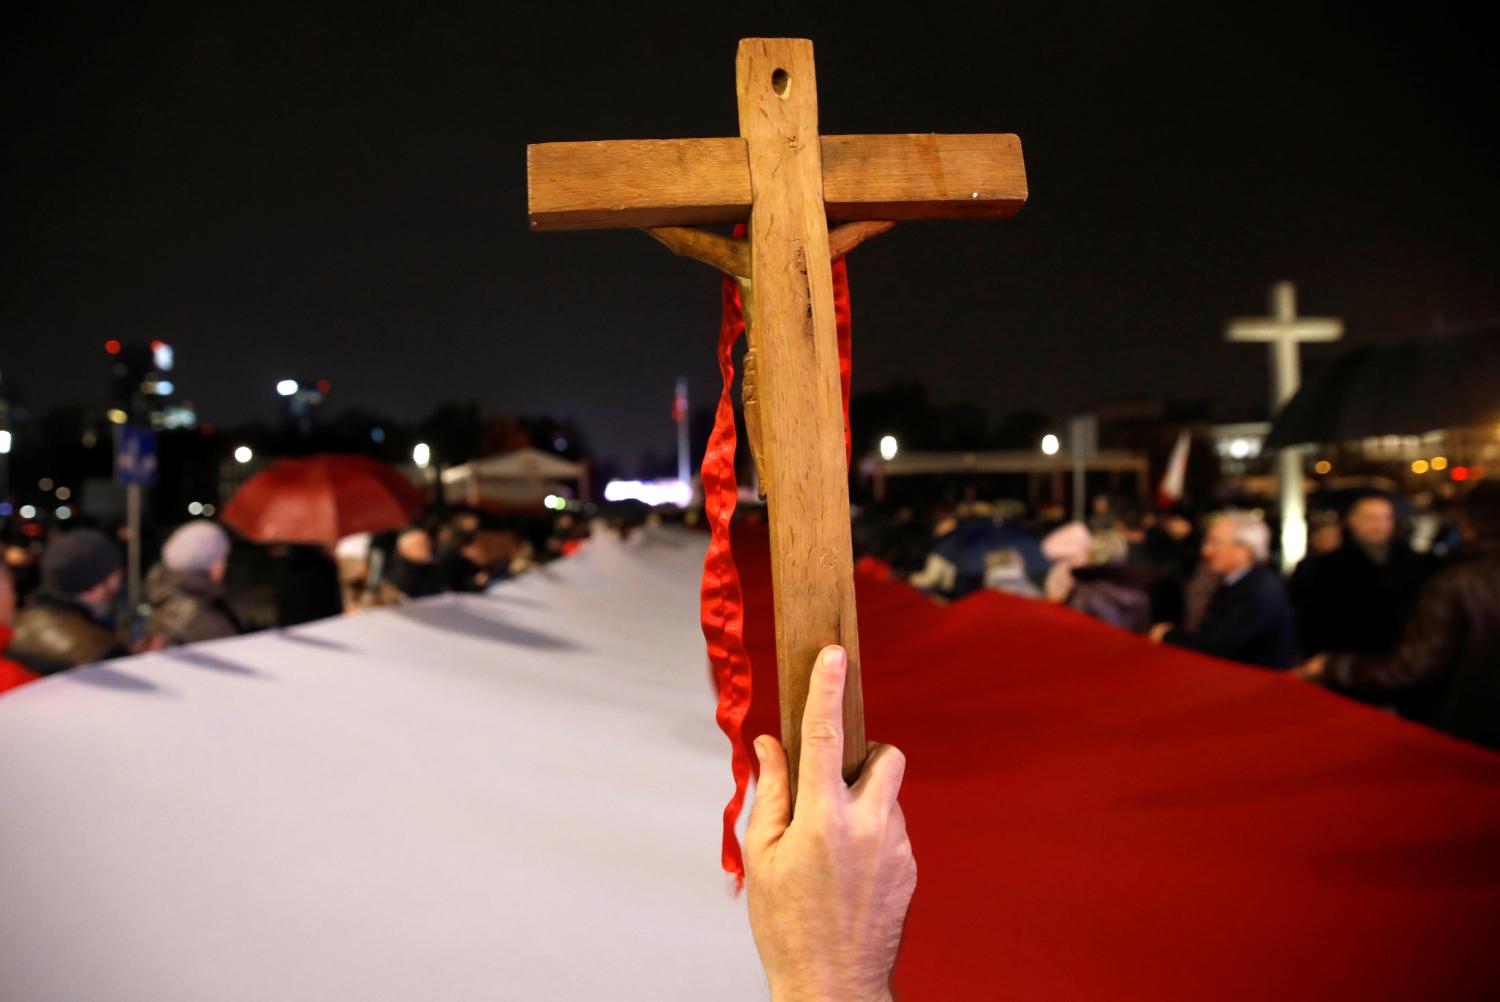 A person holds up a wooden cross during a march organized by Poland's ruling Law and Justice (PiS) party to commemorate victims of a plane crash that killed Poland's then-president and 95 other people, and to celebrate 101st anniversary of national independence, a day before the anniversary that will be marked by a mass march organized by far-right groups, in Warsaw, Poland November 10, 2019. REUTERS/Kacper Pempel - RC2K8D92BN55